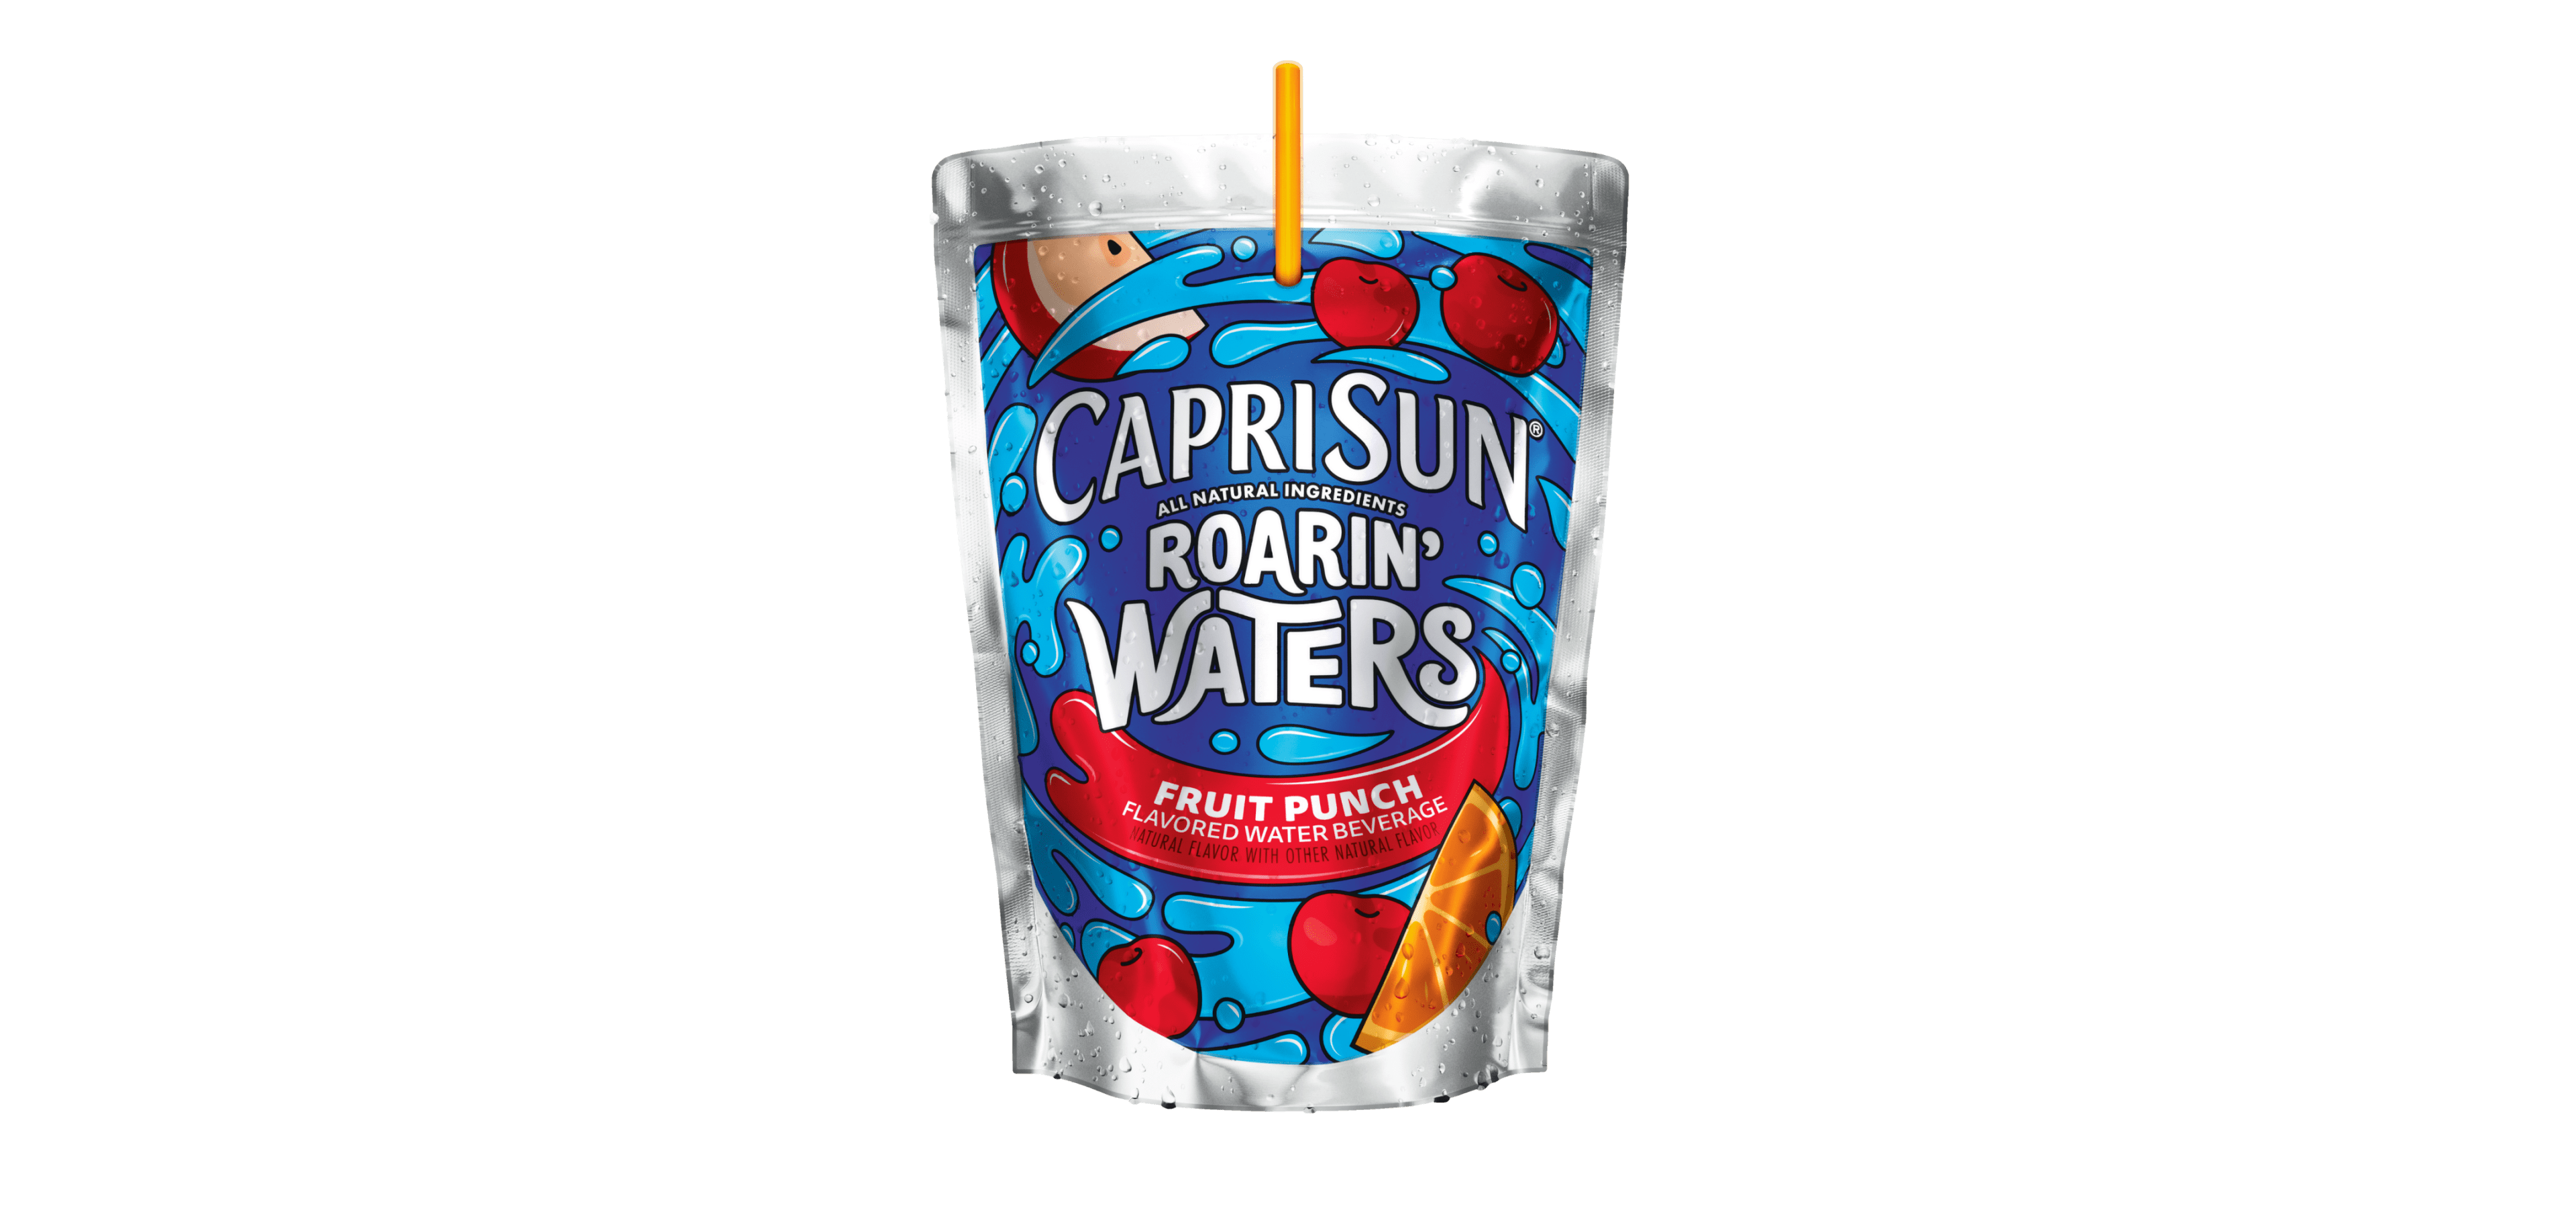 Capri Sun’s flavored water beverage! Sweetened with 1g sugar per pouch and stevia leaf extract for all day hydration.